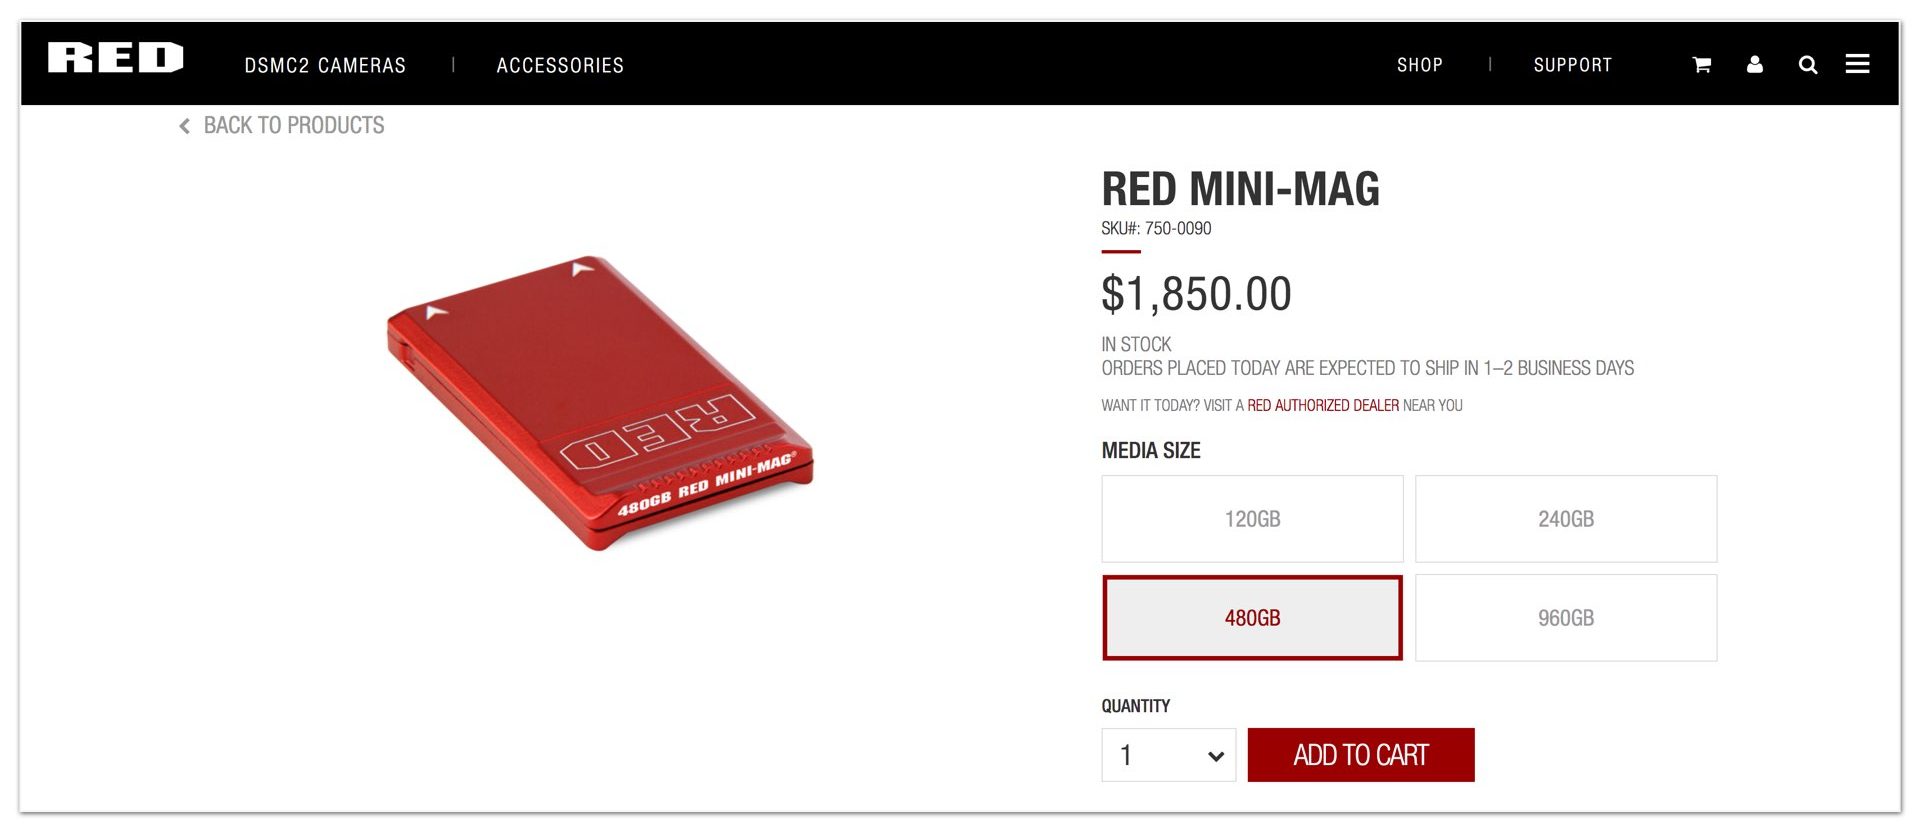 RED Mini-Mags: Why Are They So Expensive? - Y.M.Cinema Magazine